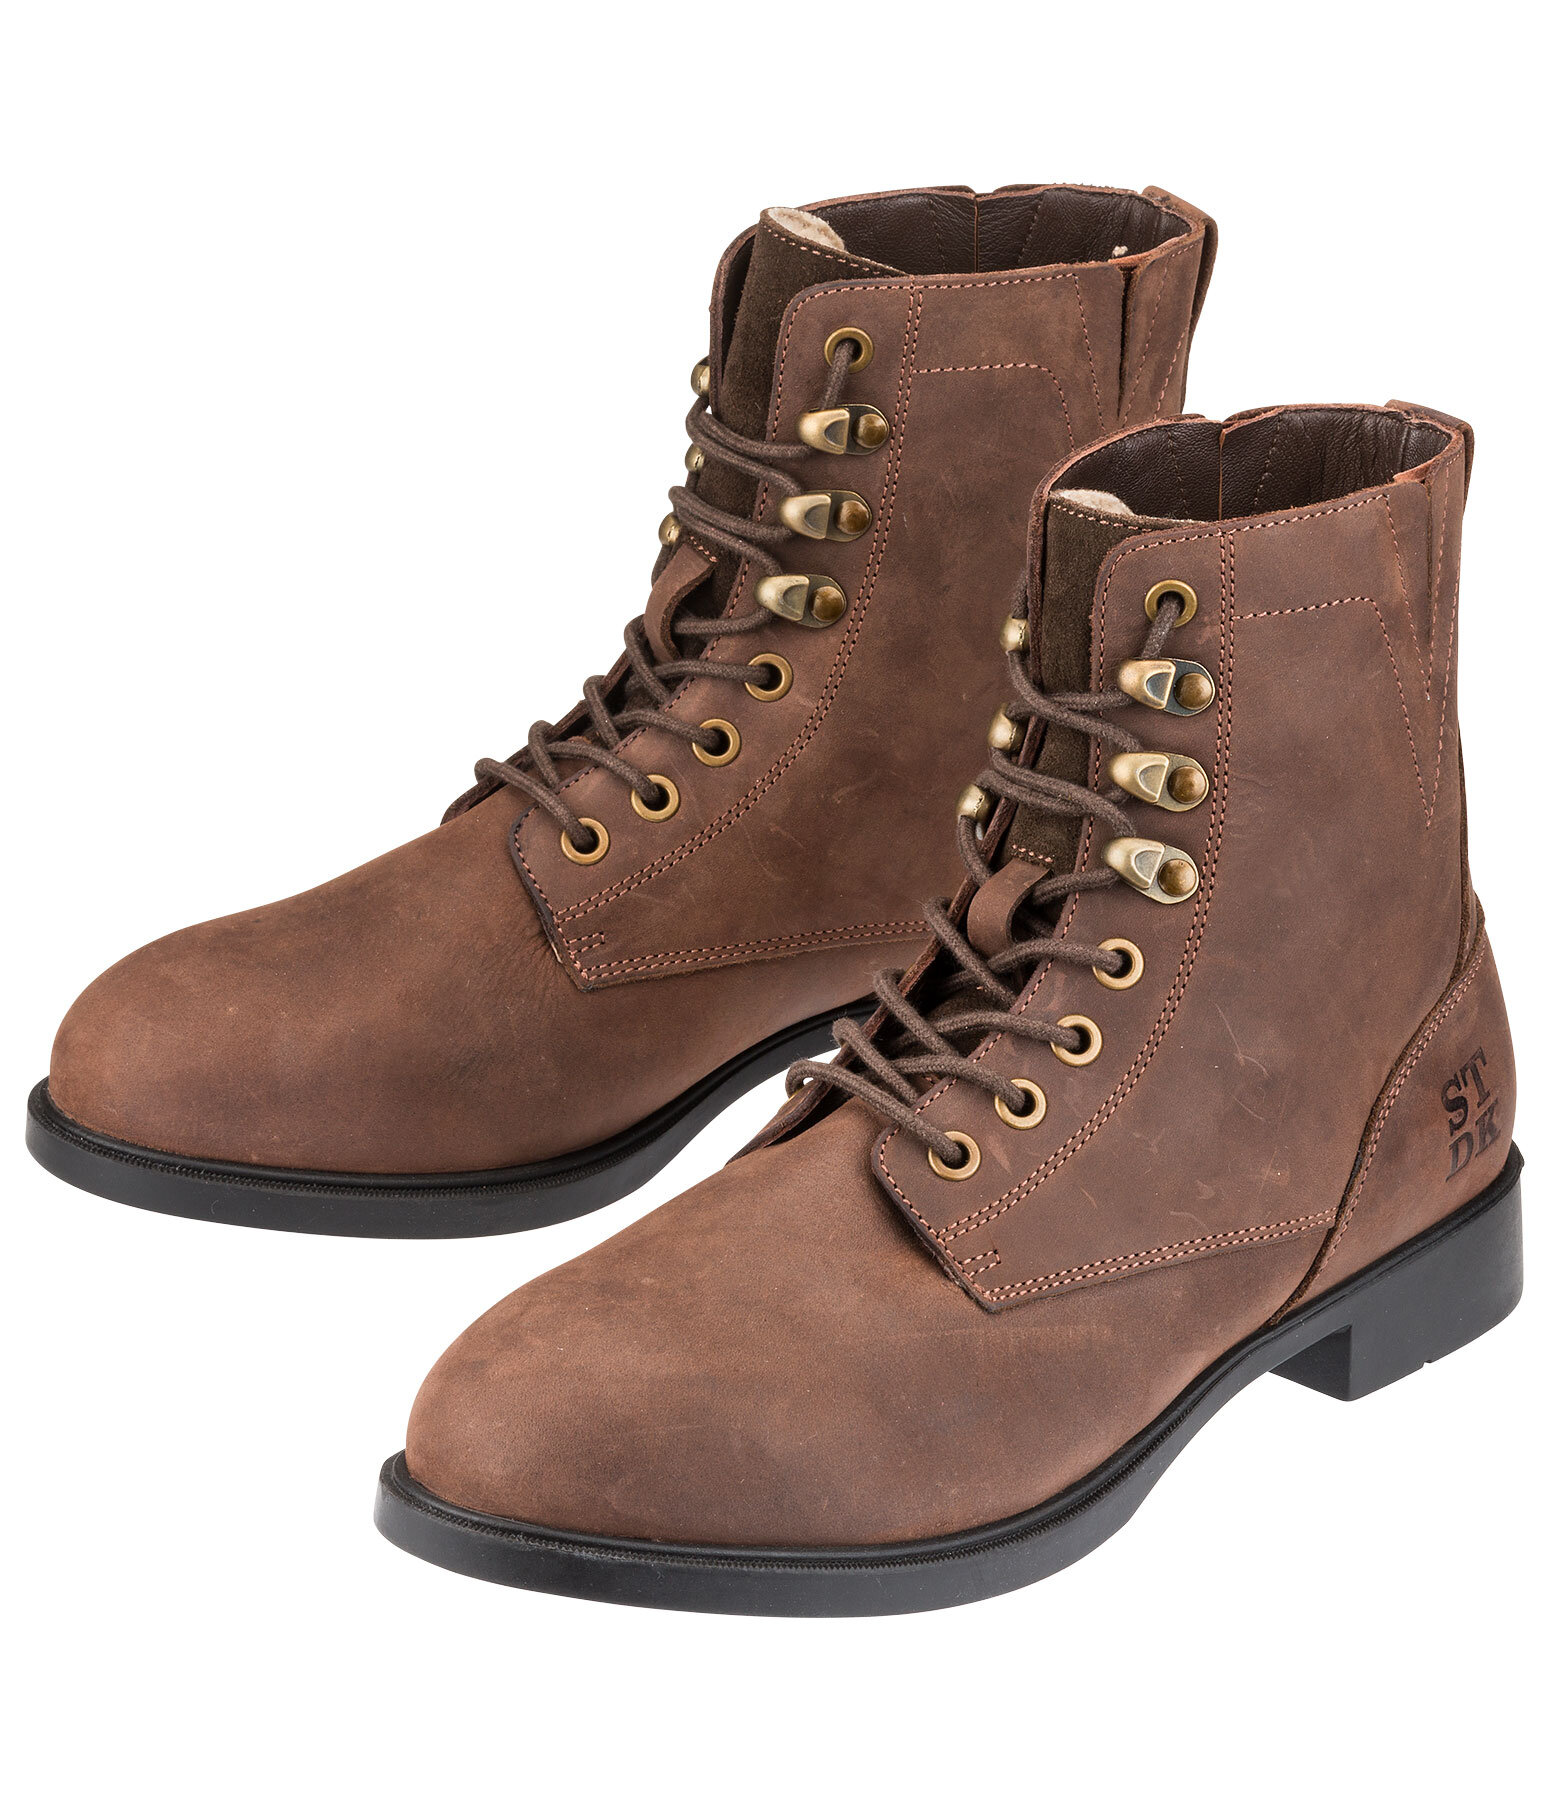 Boots invernali Lace-Up